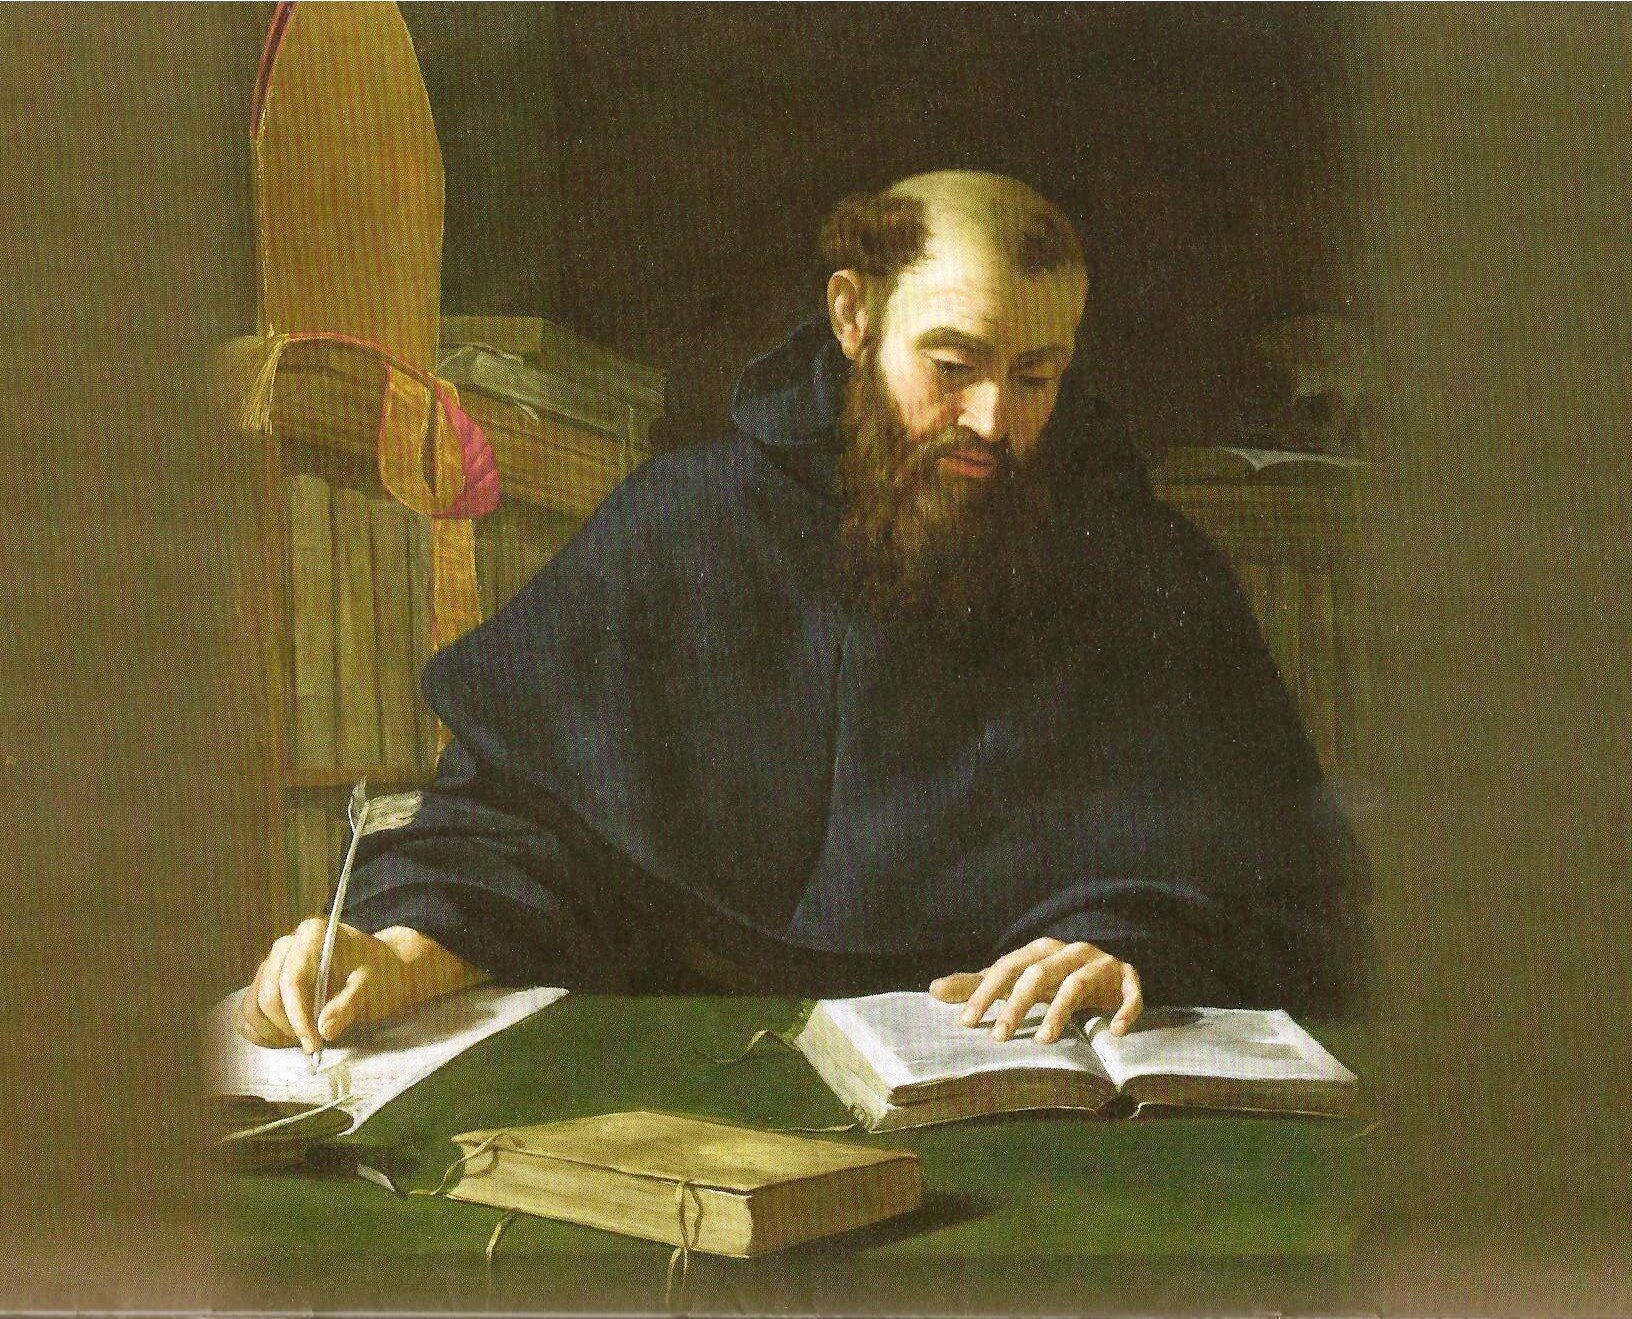 Painting of St. Augustine reading a book while writing